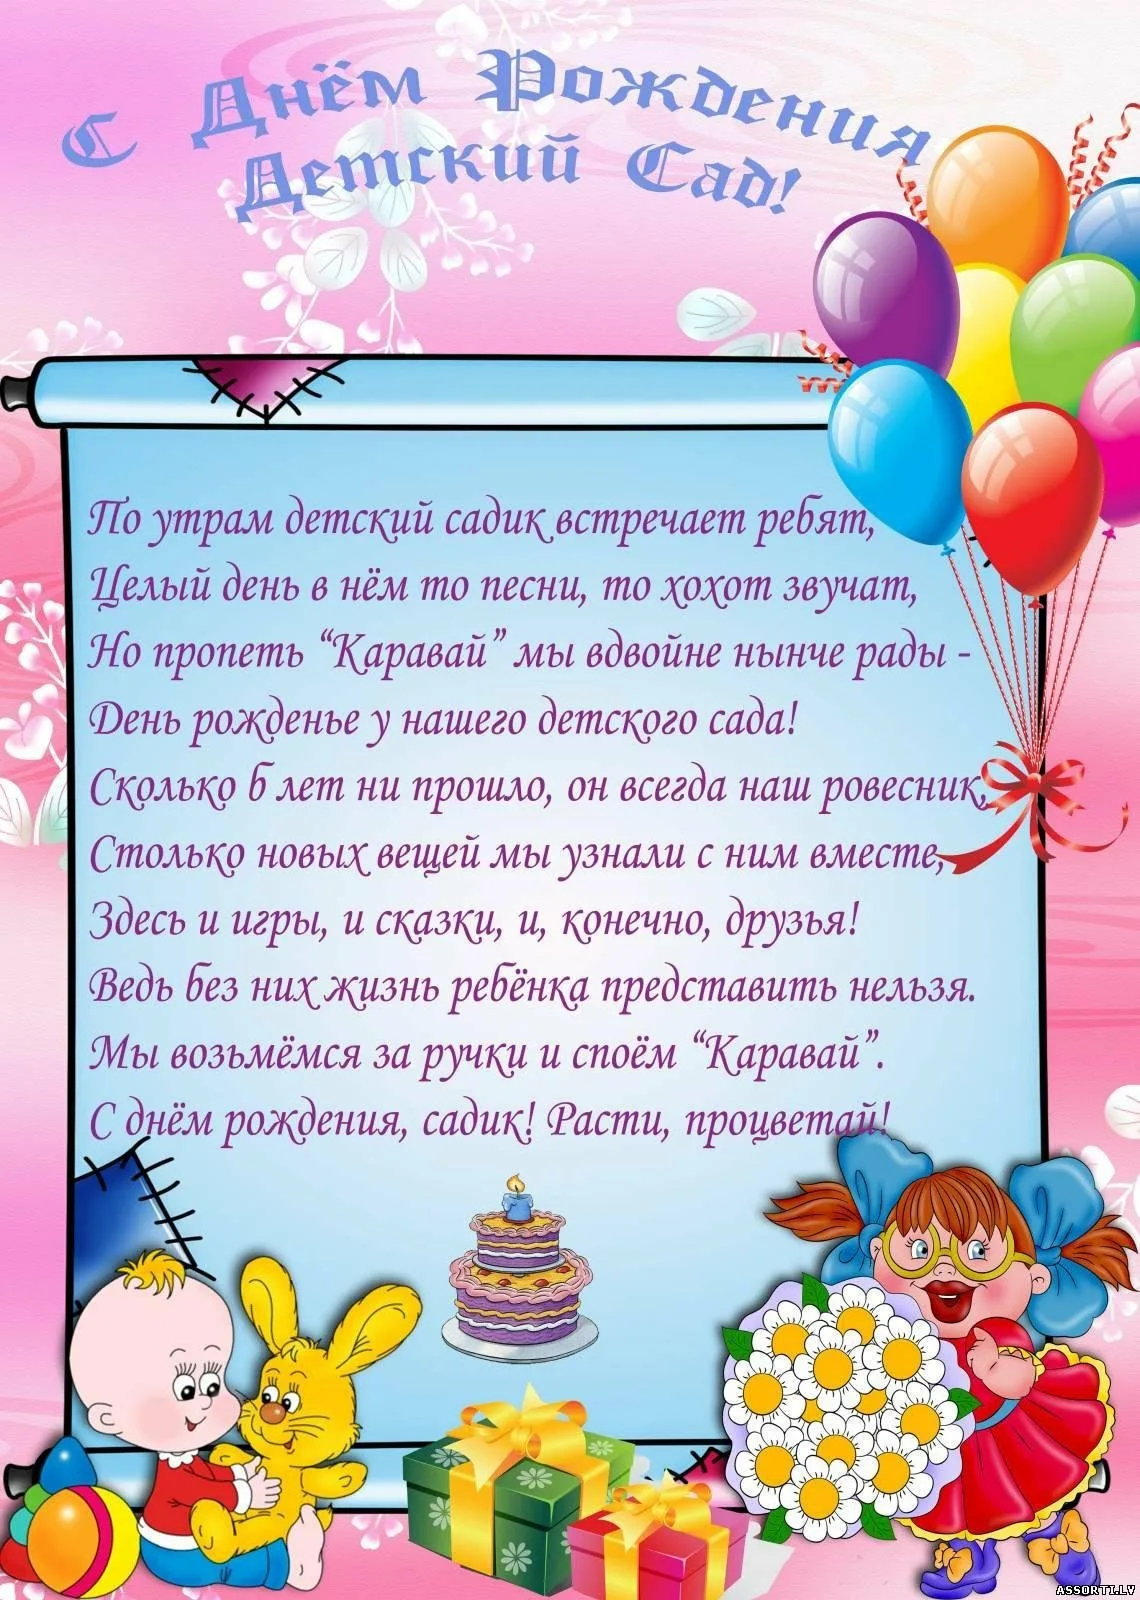 Фото Happy birthday greetings to the kindergarten teacher from the mother of the child #8